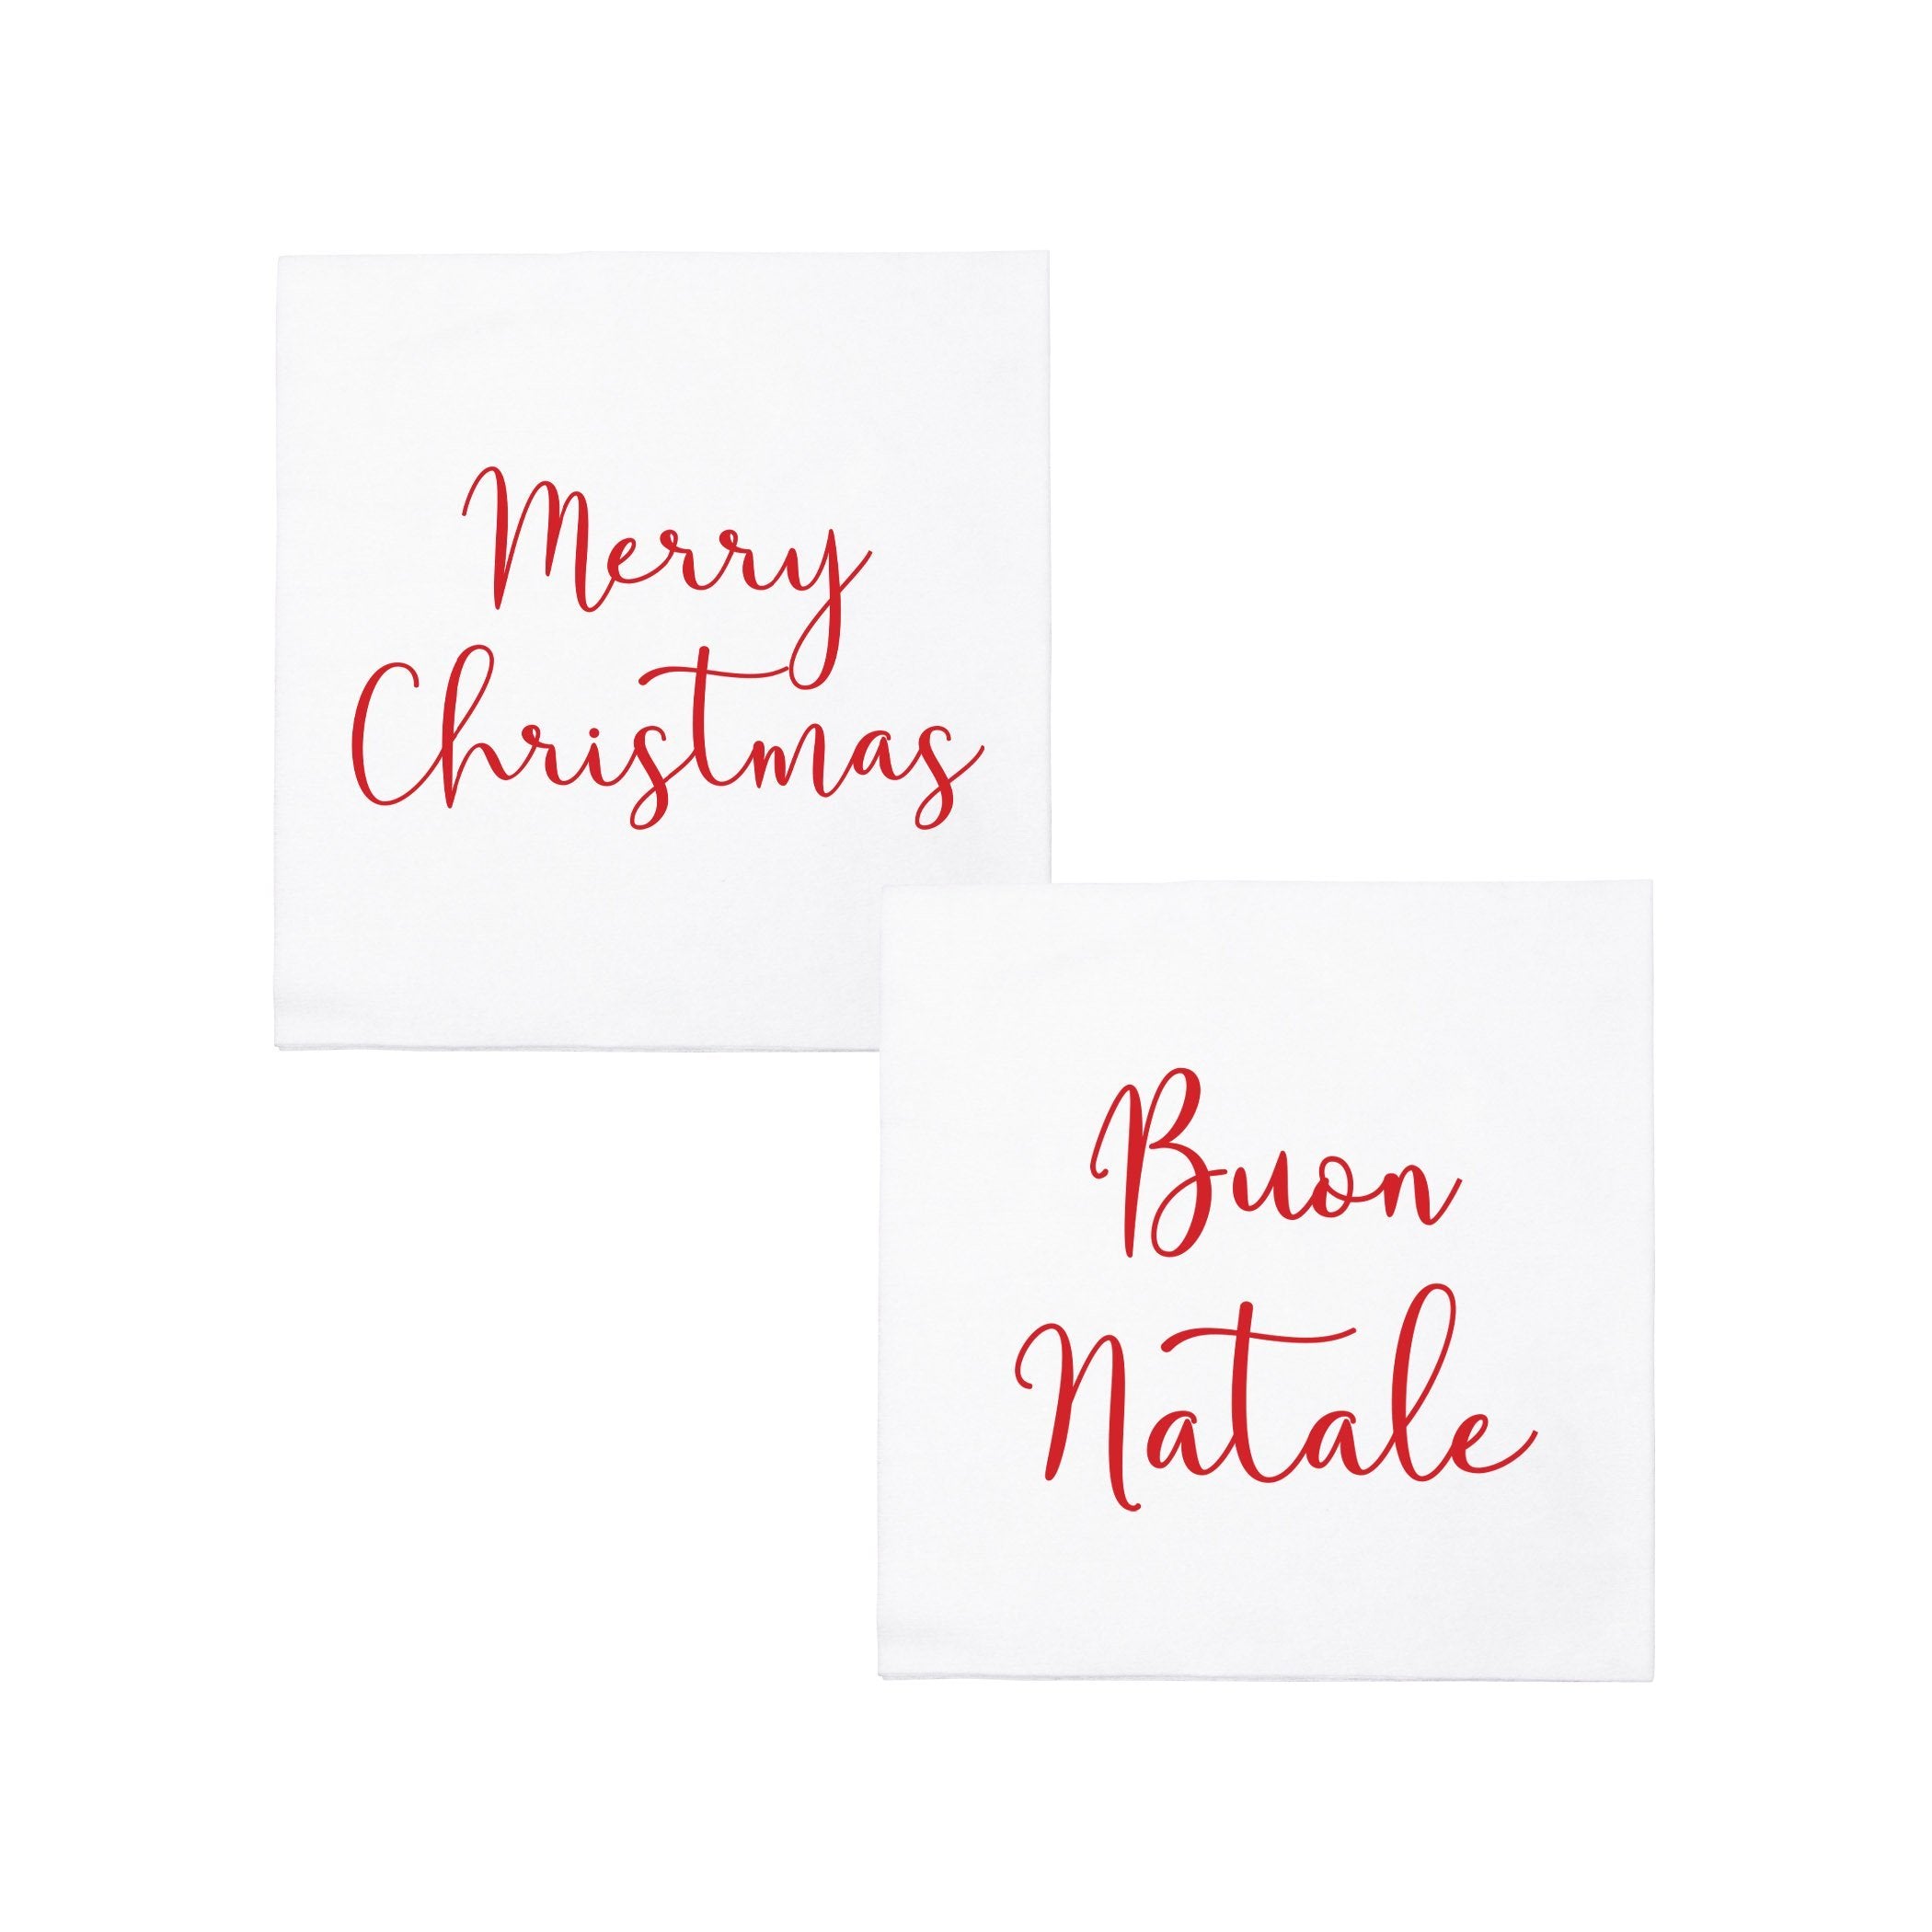 Papersoft Napkins Merry Christmas/Buon Natale Cocktail Napkins (Pack of 20)